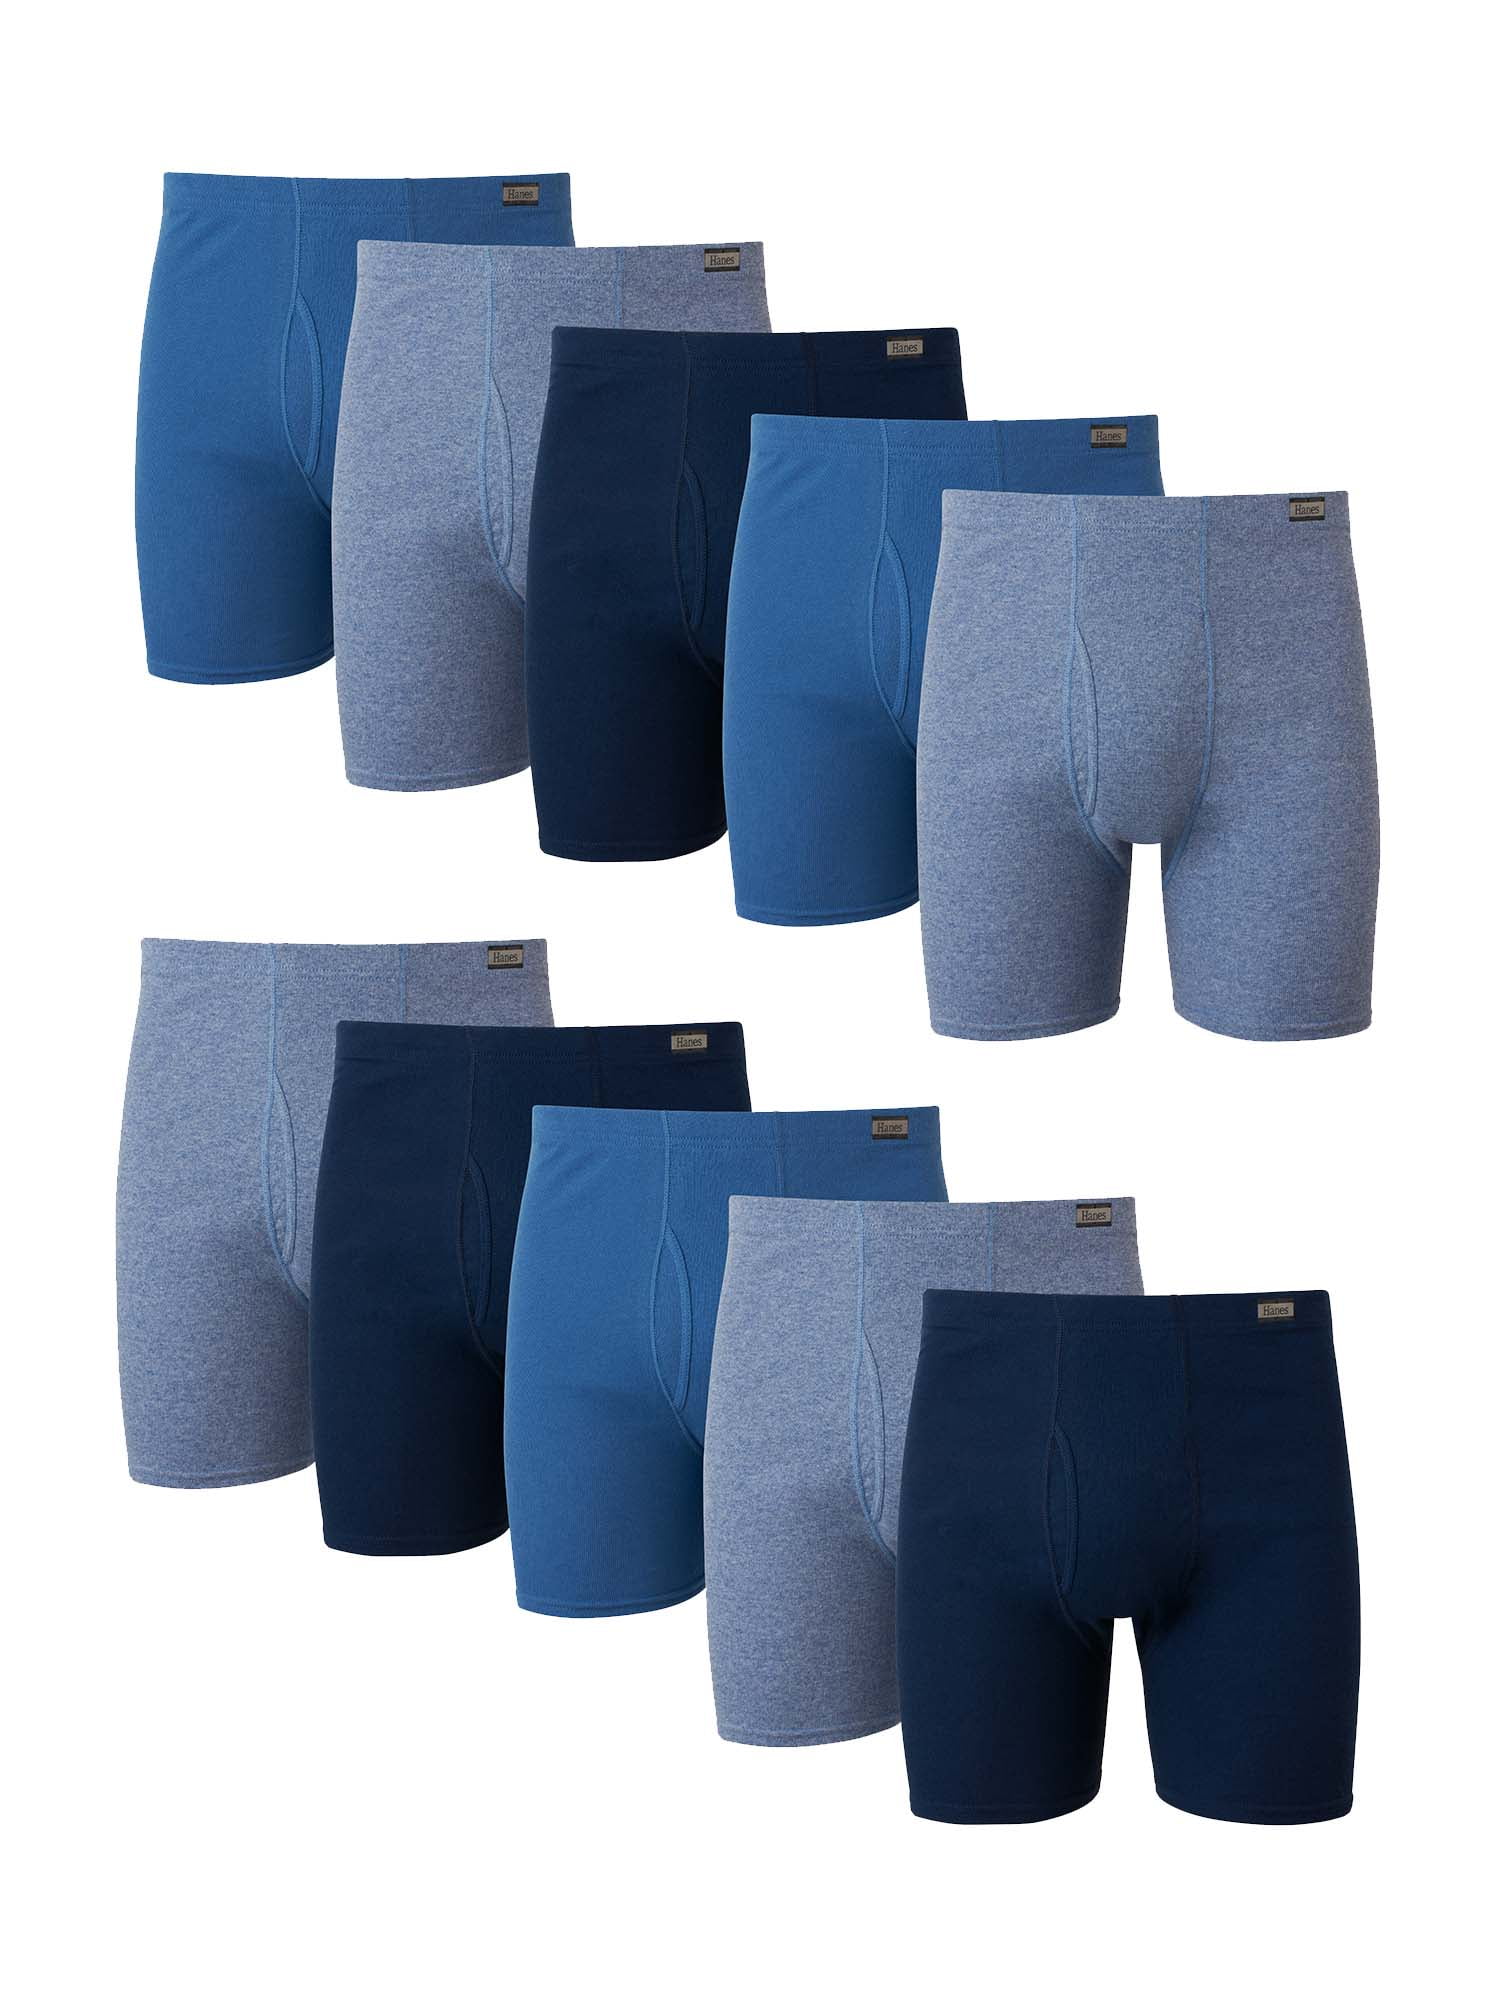 Great Value Assorted 9 Pack Firetrap Mens Boxer Shorts / Trunks All Sizes 